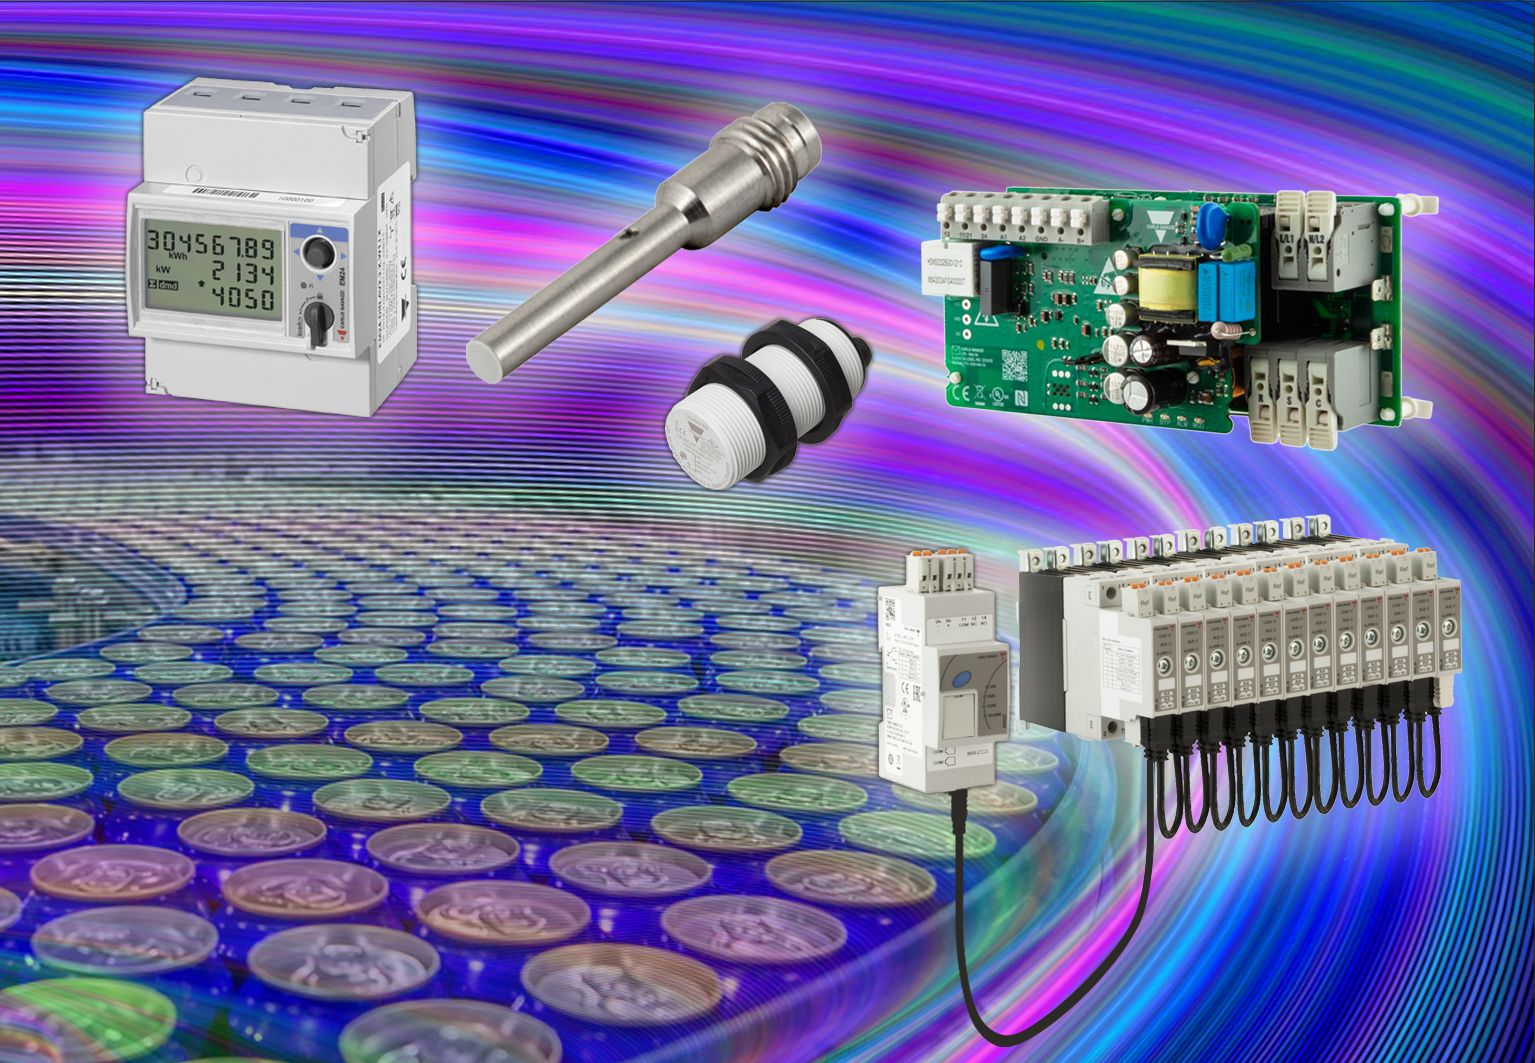 Carlo Gavazzi's provides complete solutions for the future  at Drives and Controls 2022